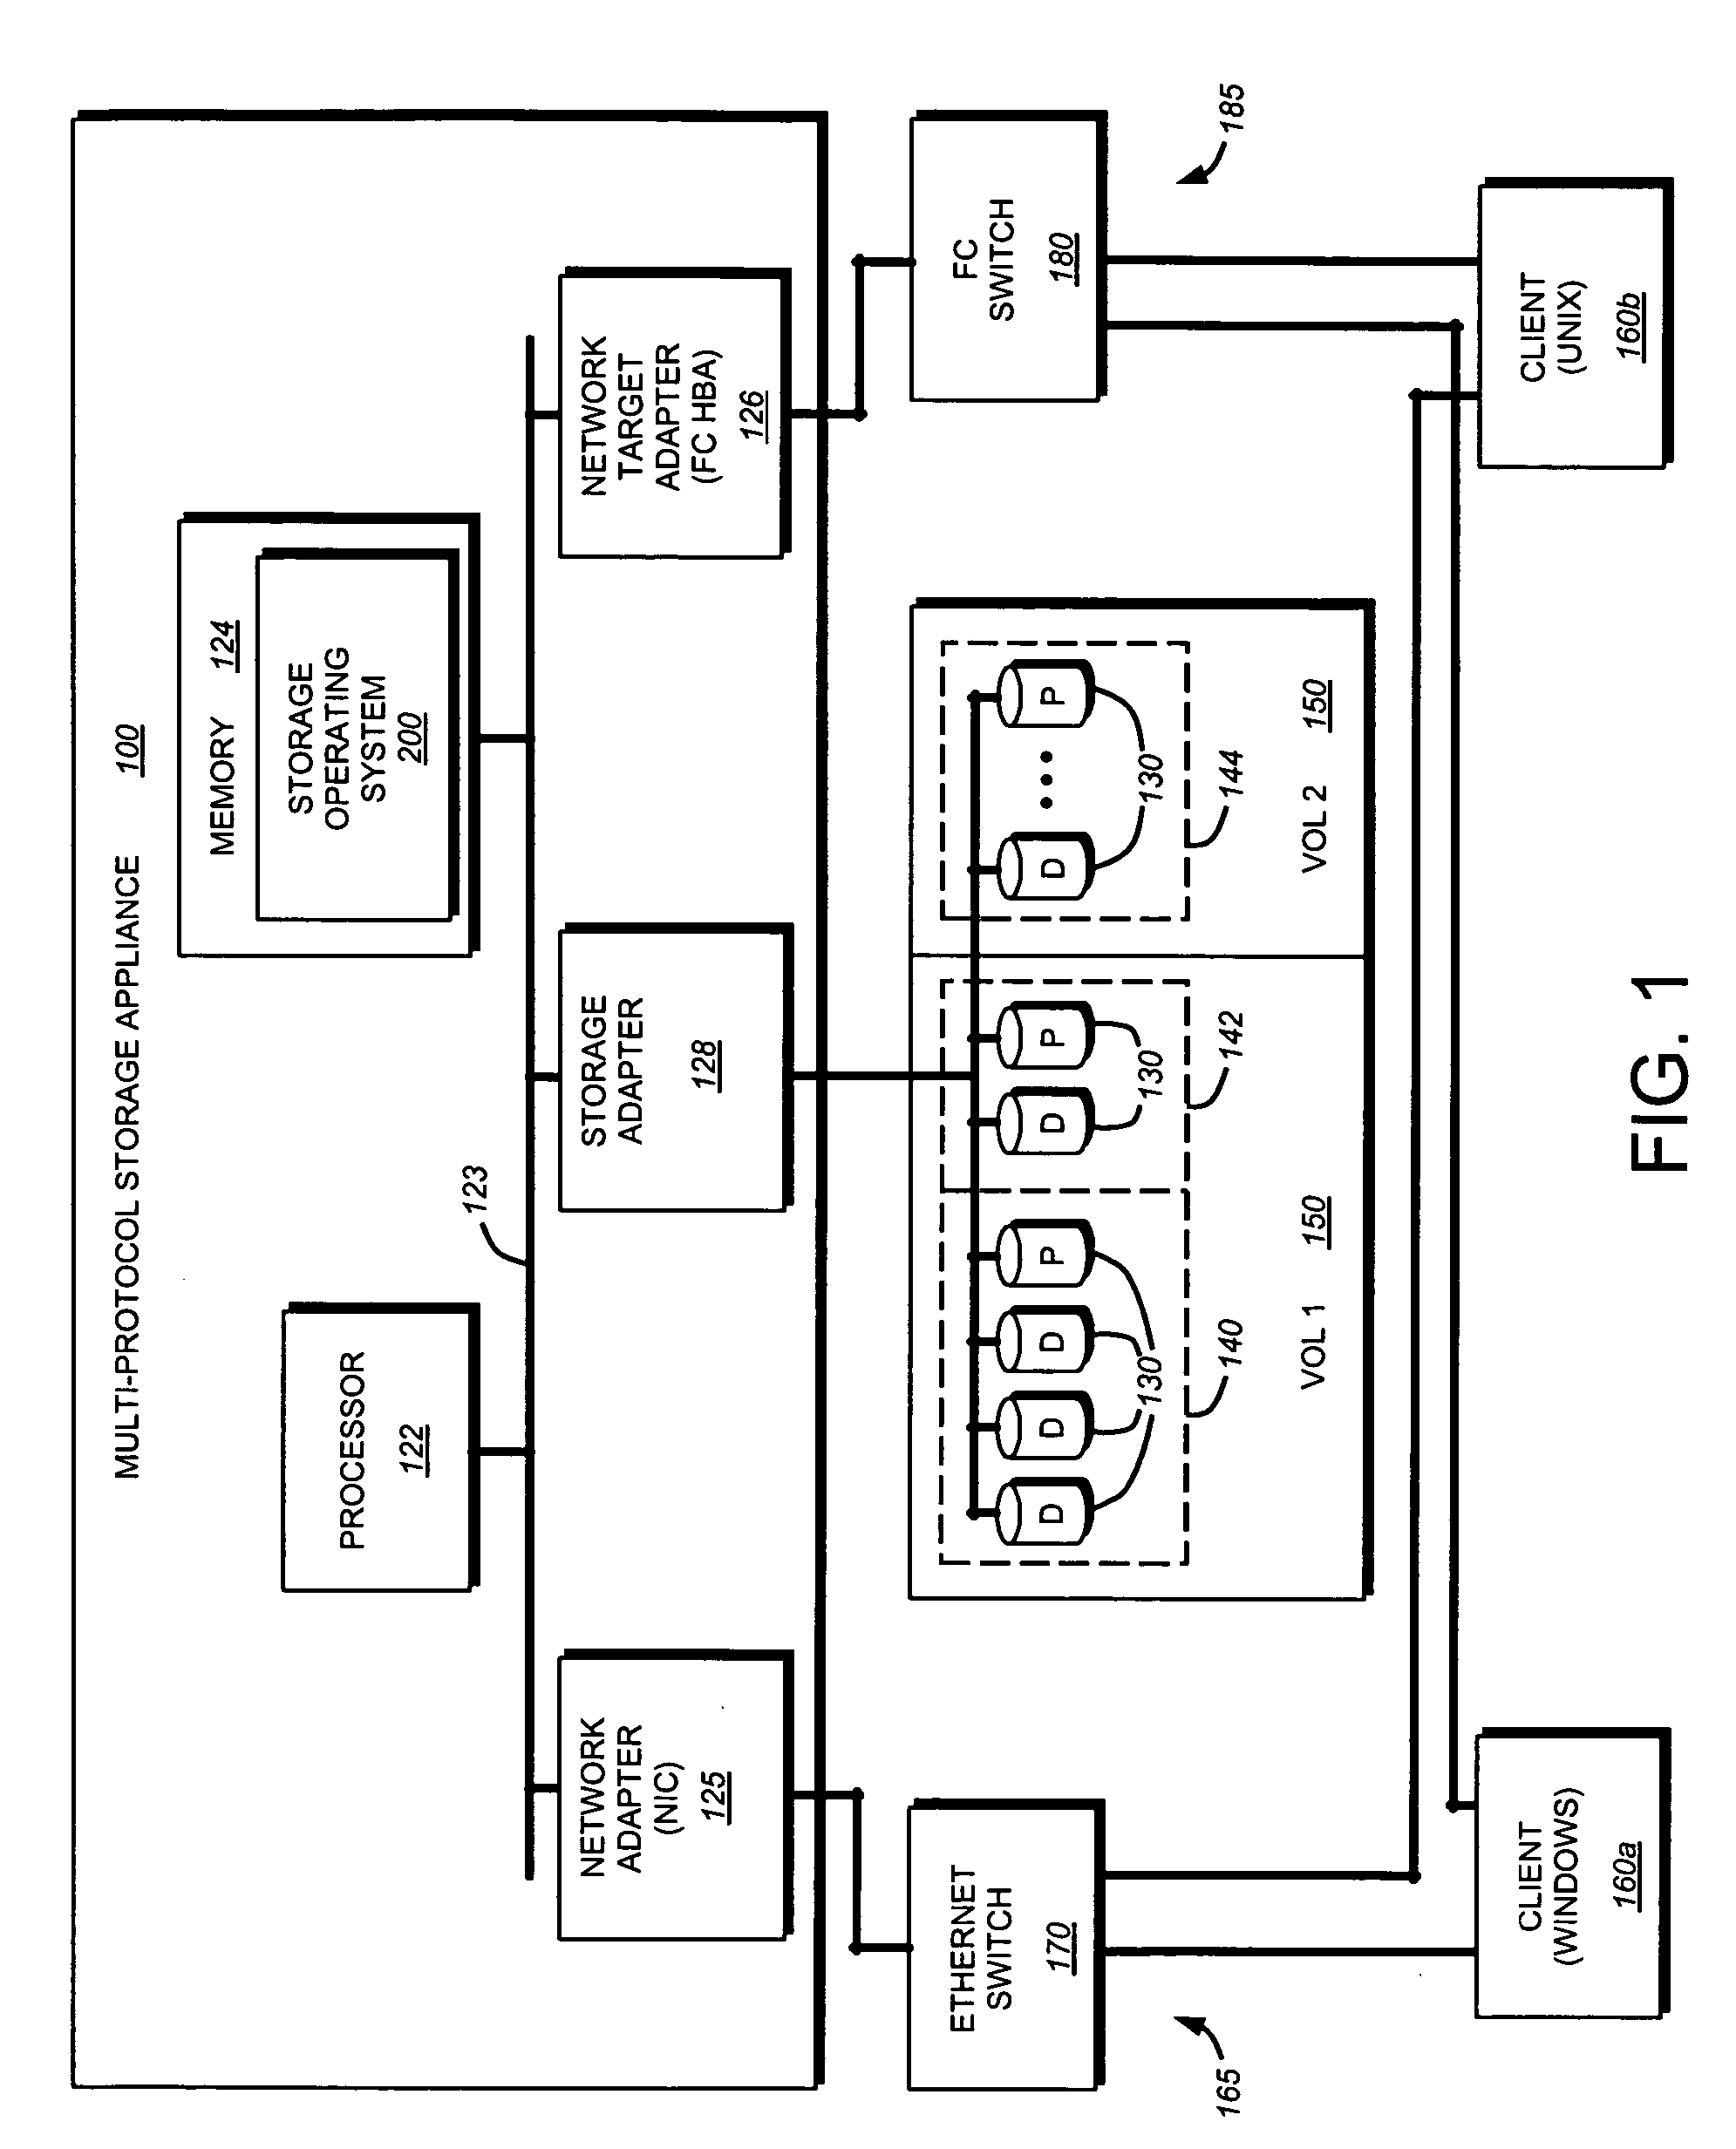 System and method for supporting block-based protocols on a virtual storage appliance executing within a physical storage appliance